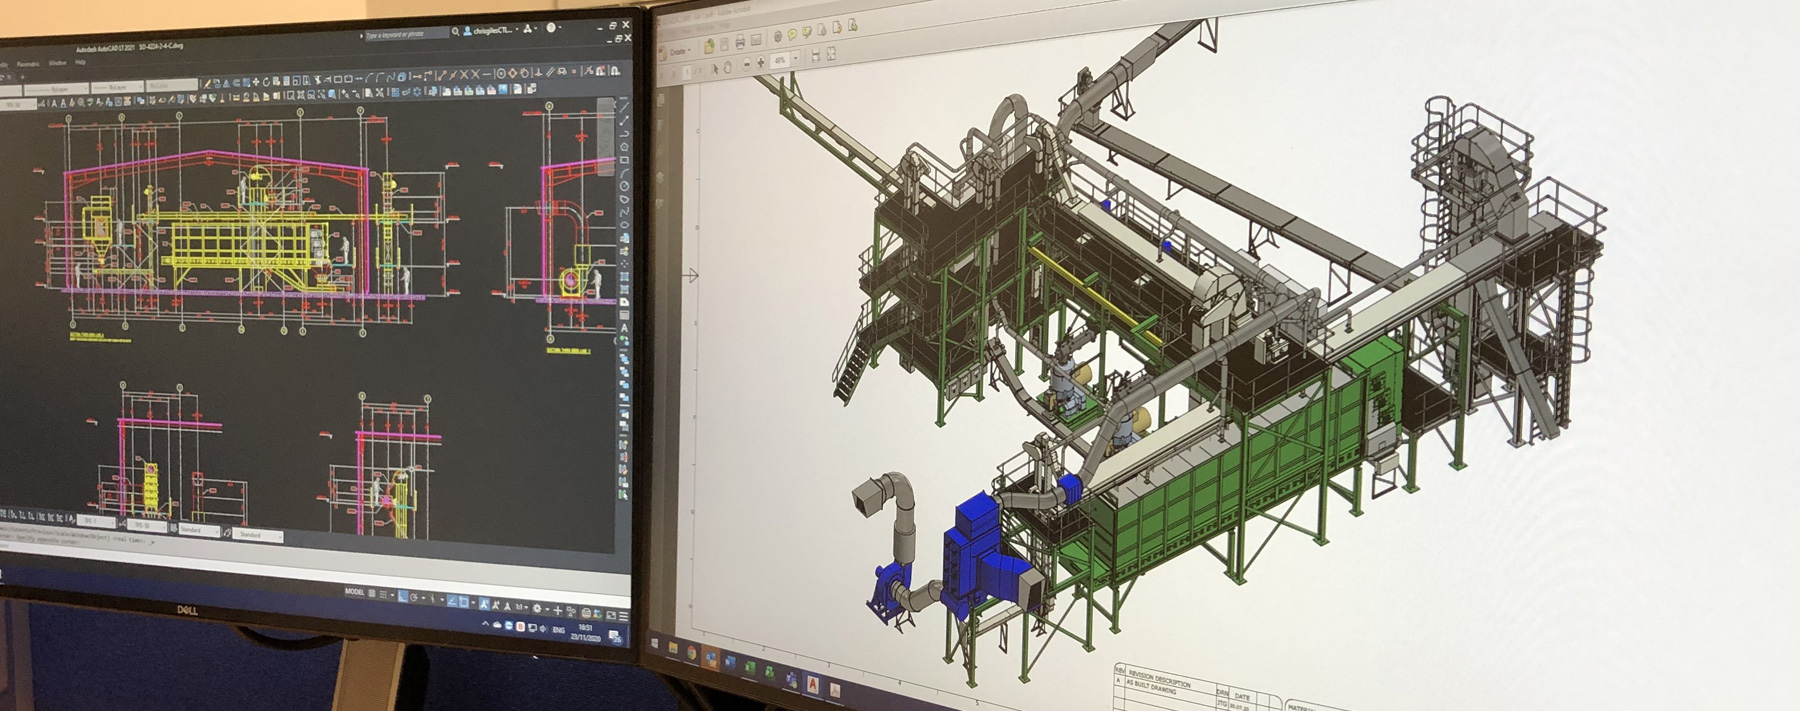 Process plant design and engineering services